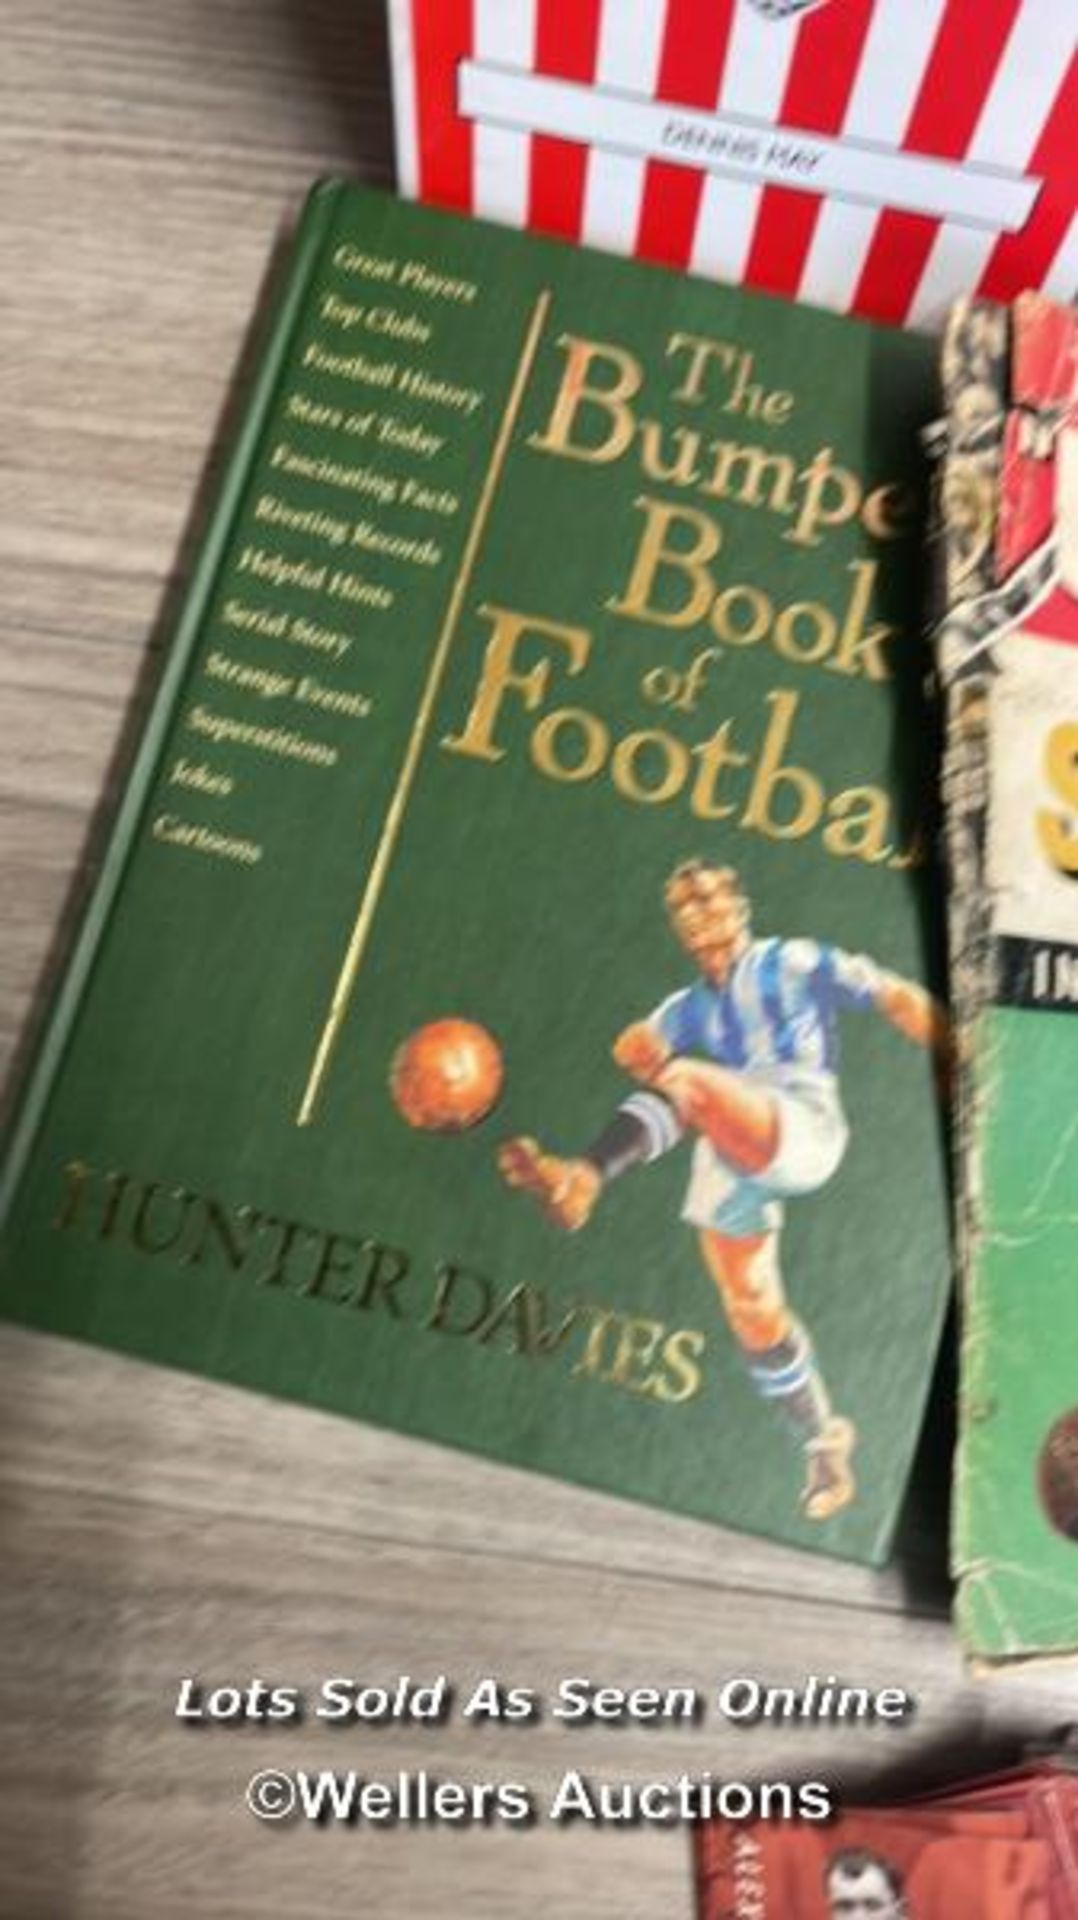 FOOTBALL - A LARGE COLLECTION OF BOOKS, COLLECTABLE CARDS INCLUDING THE BOYS BOOK OF SOCCER 1966, - Image 11 of 11